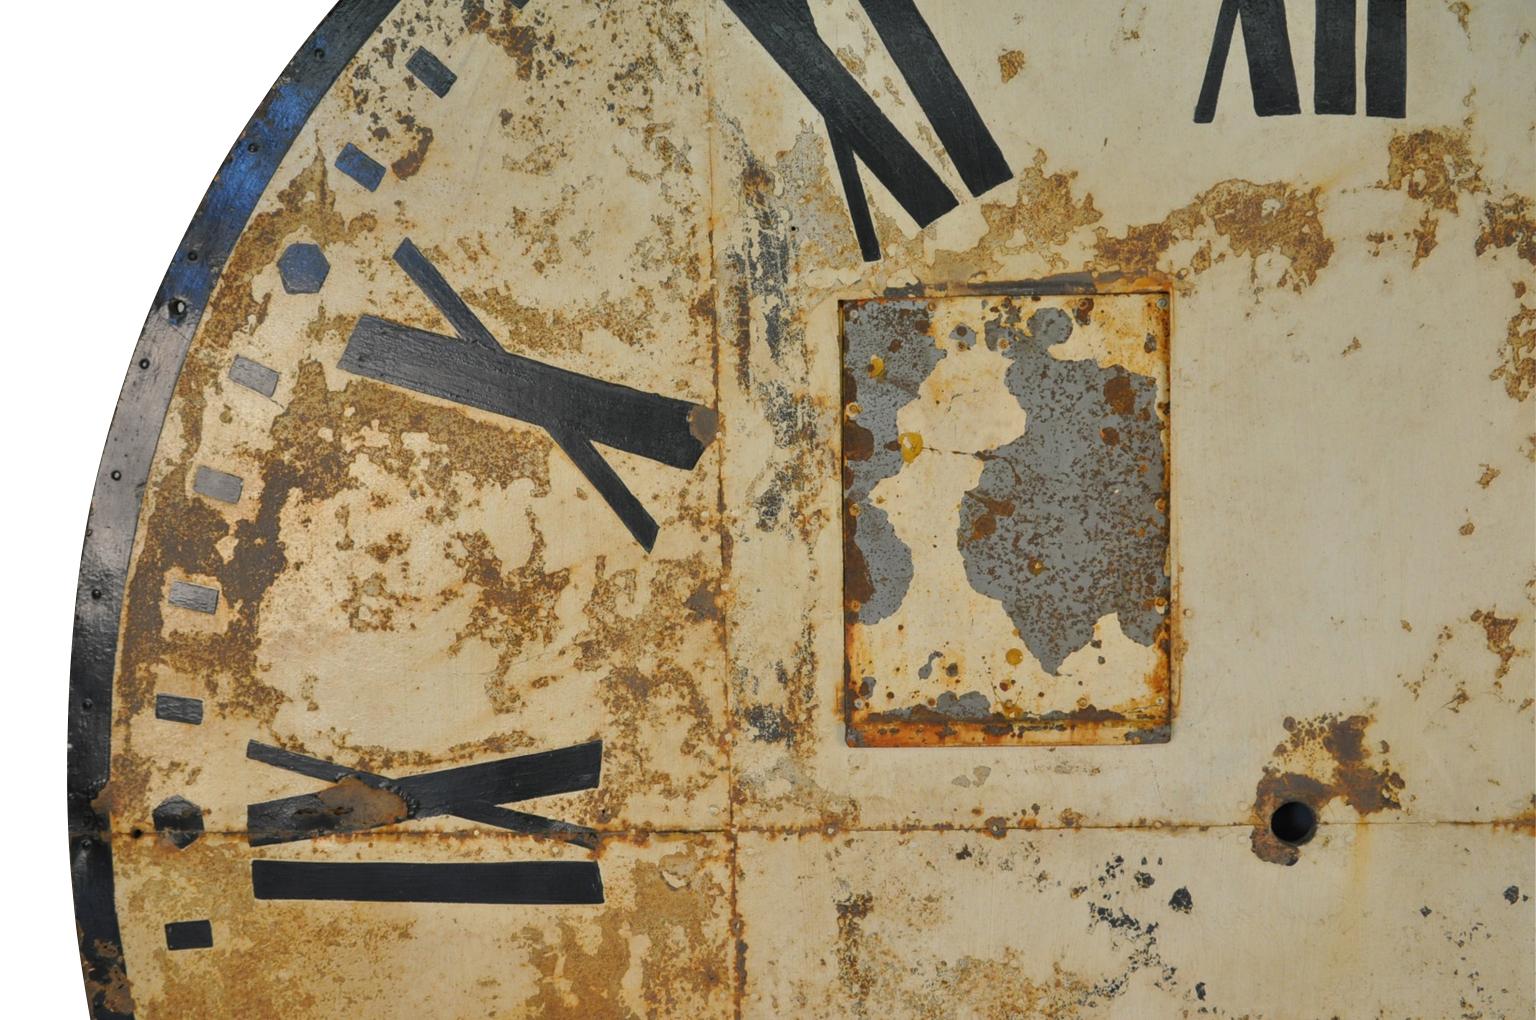 A monumental later 19th century town hall clock face from the South of France in painted metal. Fabulous as wall-mounted artwork or as a terrific headboard.